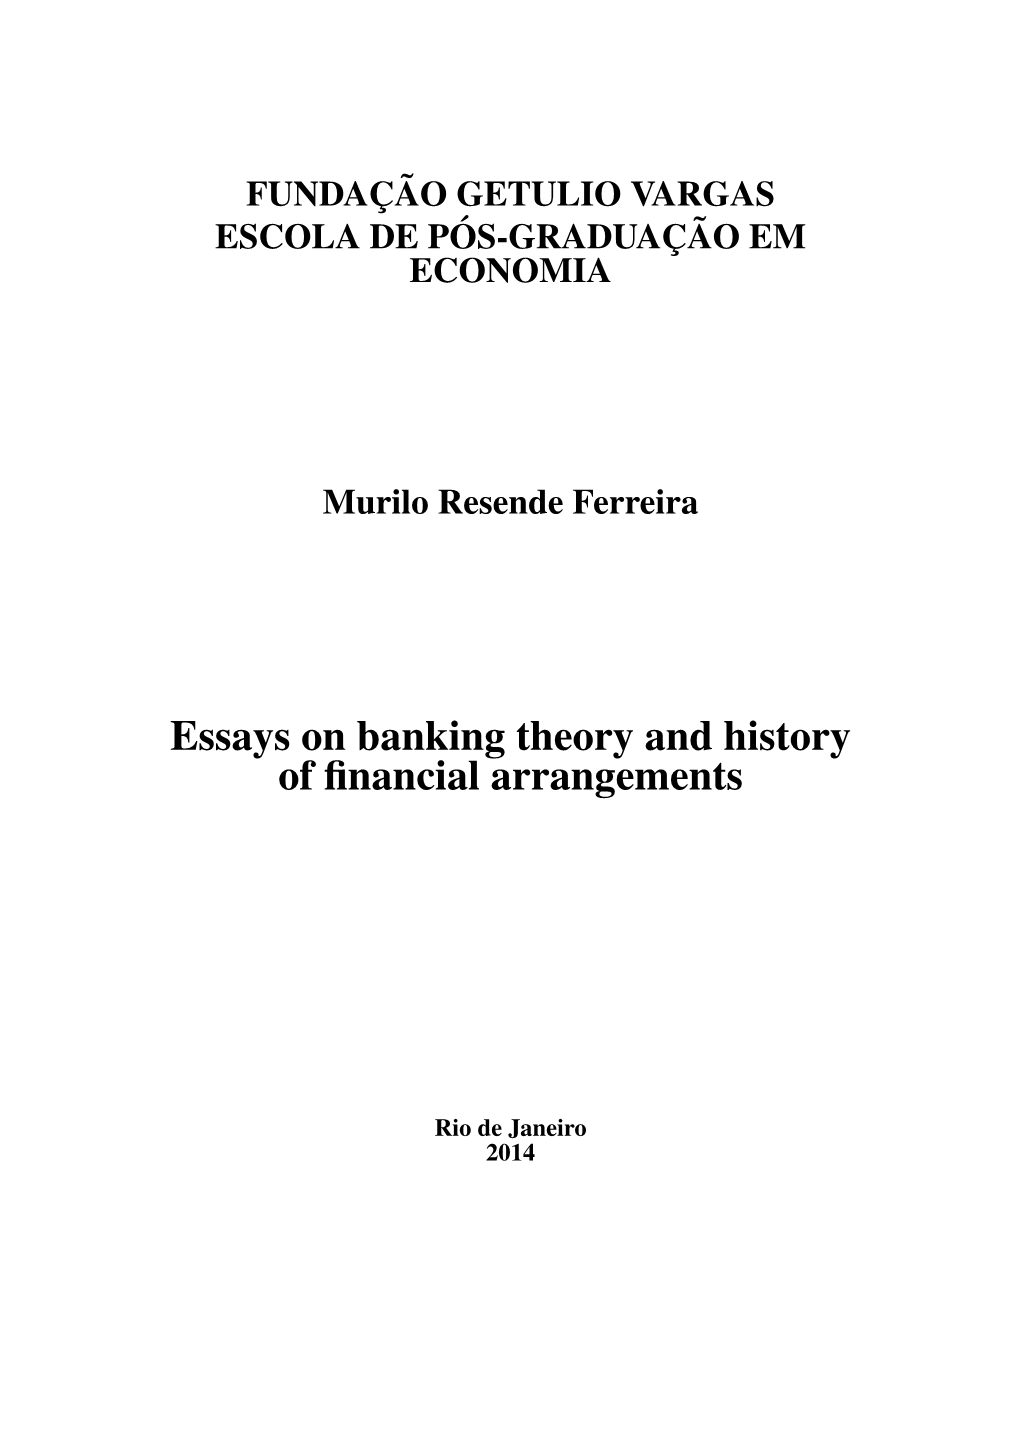 Essays on Banking Theory and History of Financial Arrangements / Murilo Resende Ferreira